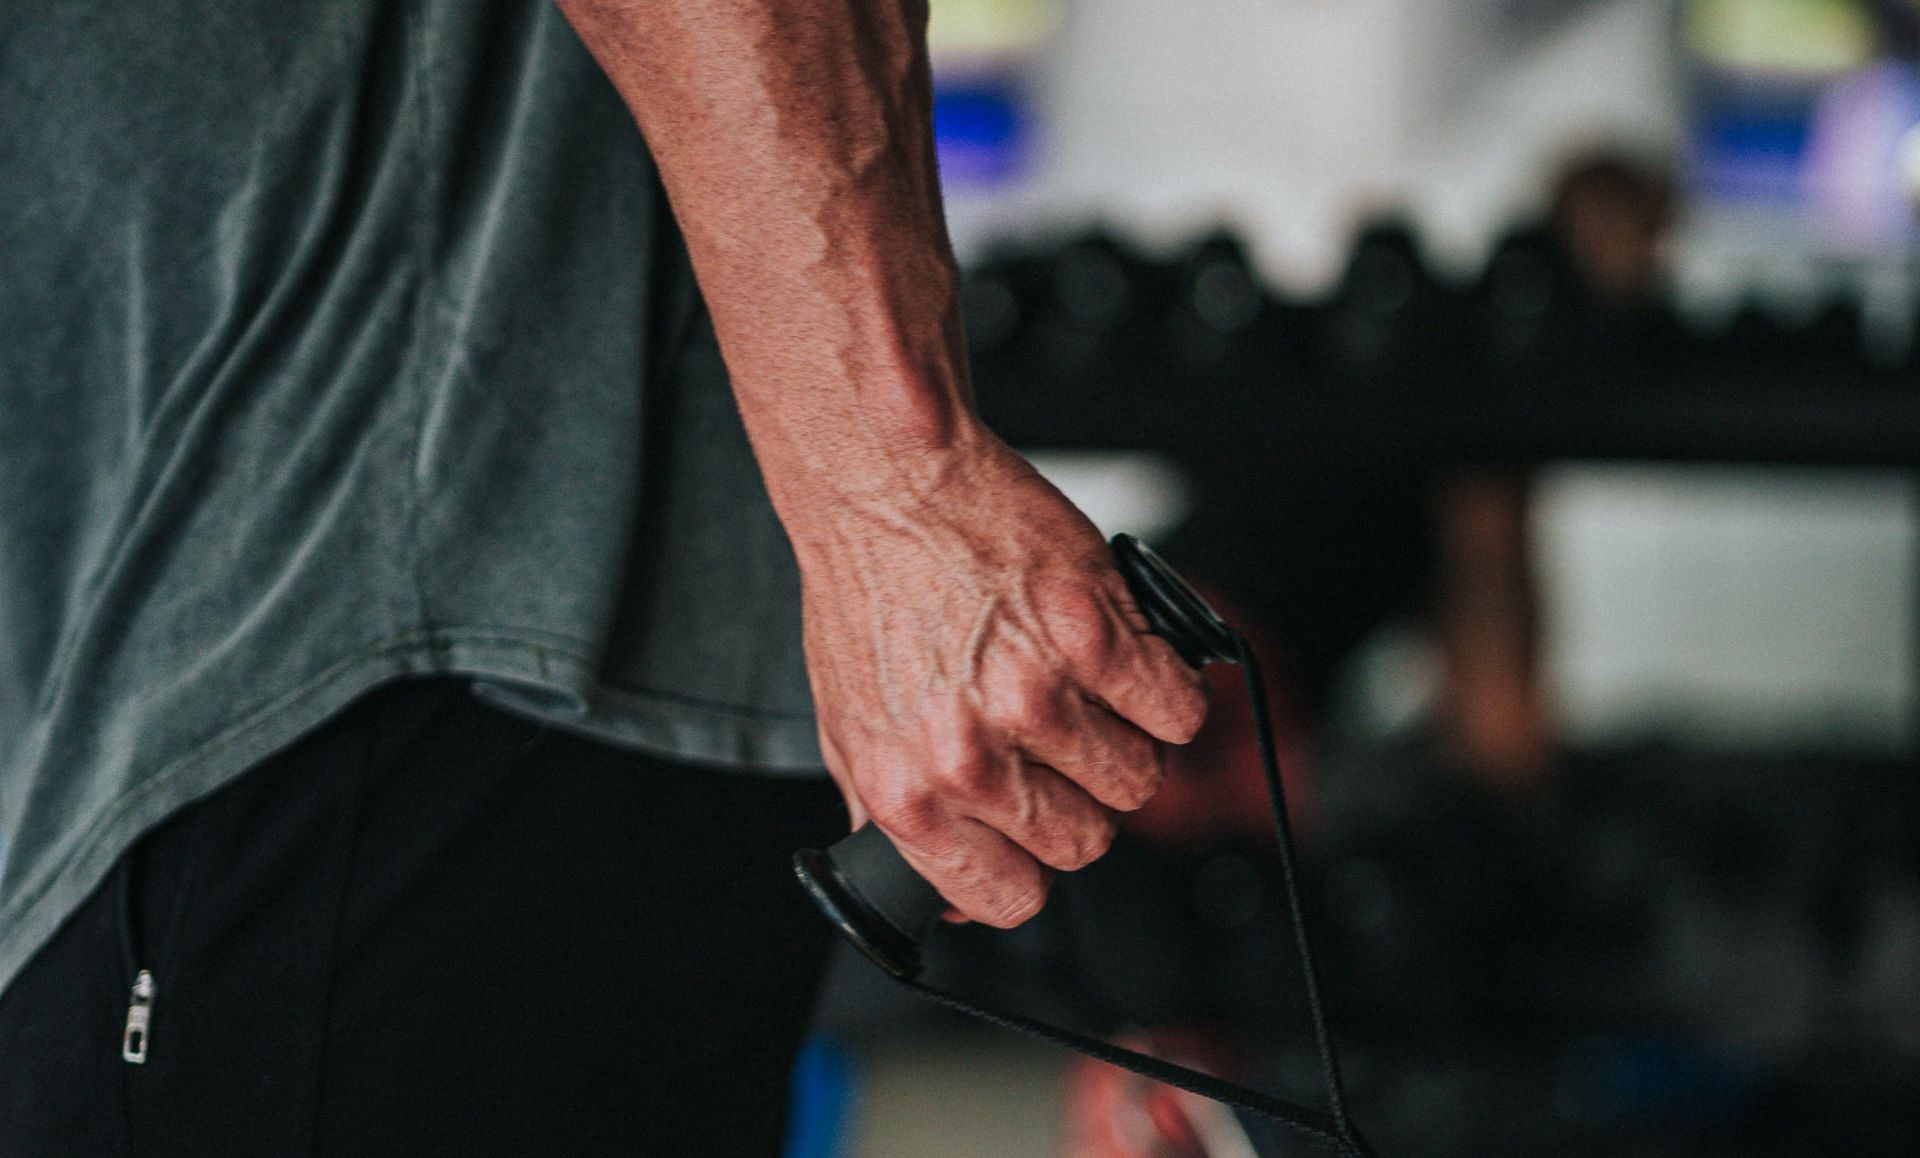 A forearm workout at home is a great way to develop grip strength, increase wrist stability (Photo by Andrew Valdivia on Unsplash)